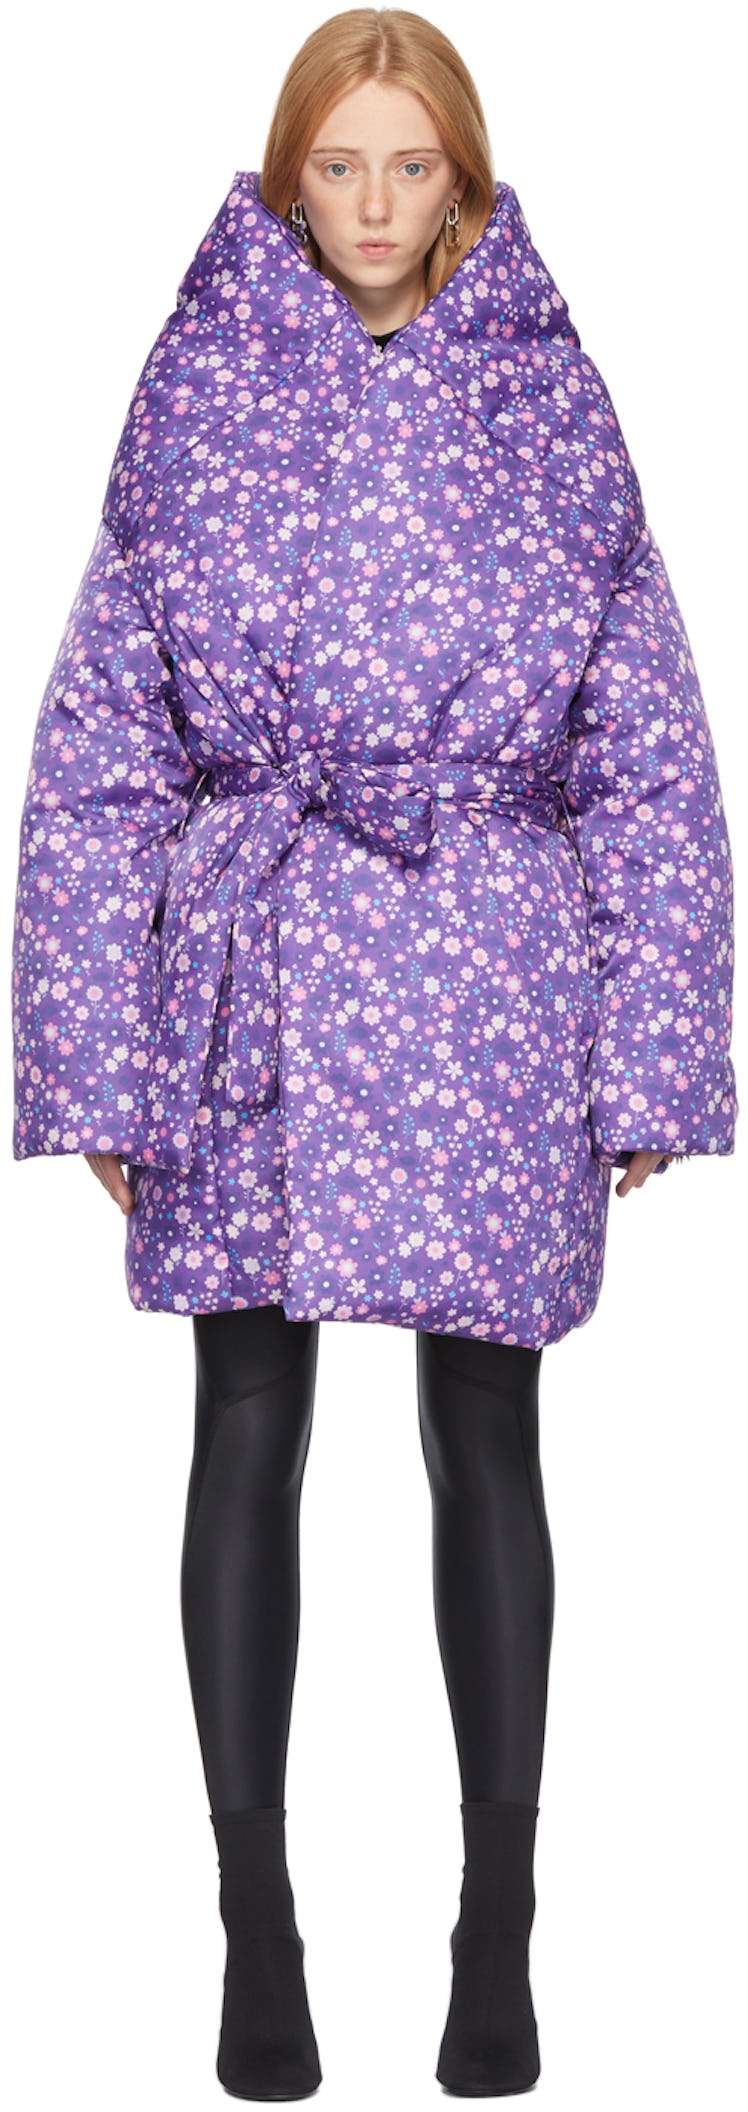 Purple Graphic Flower Scooter Coat: image 1